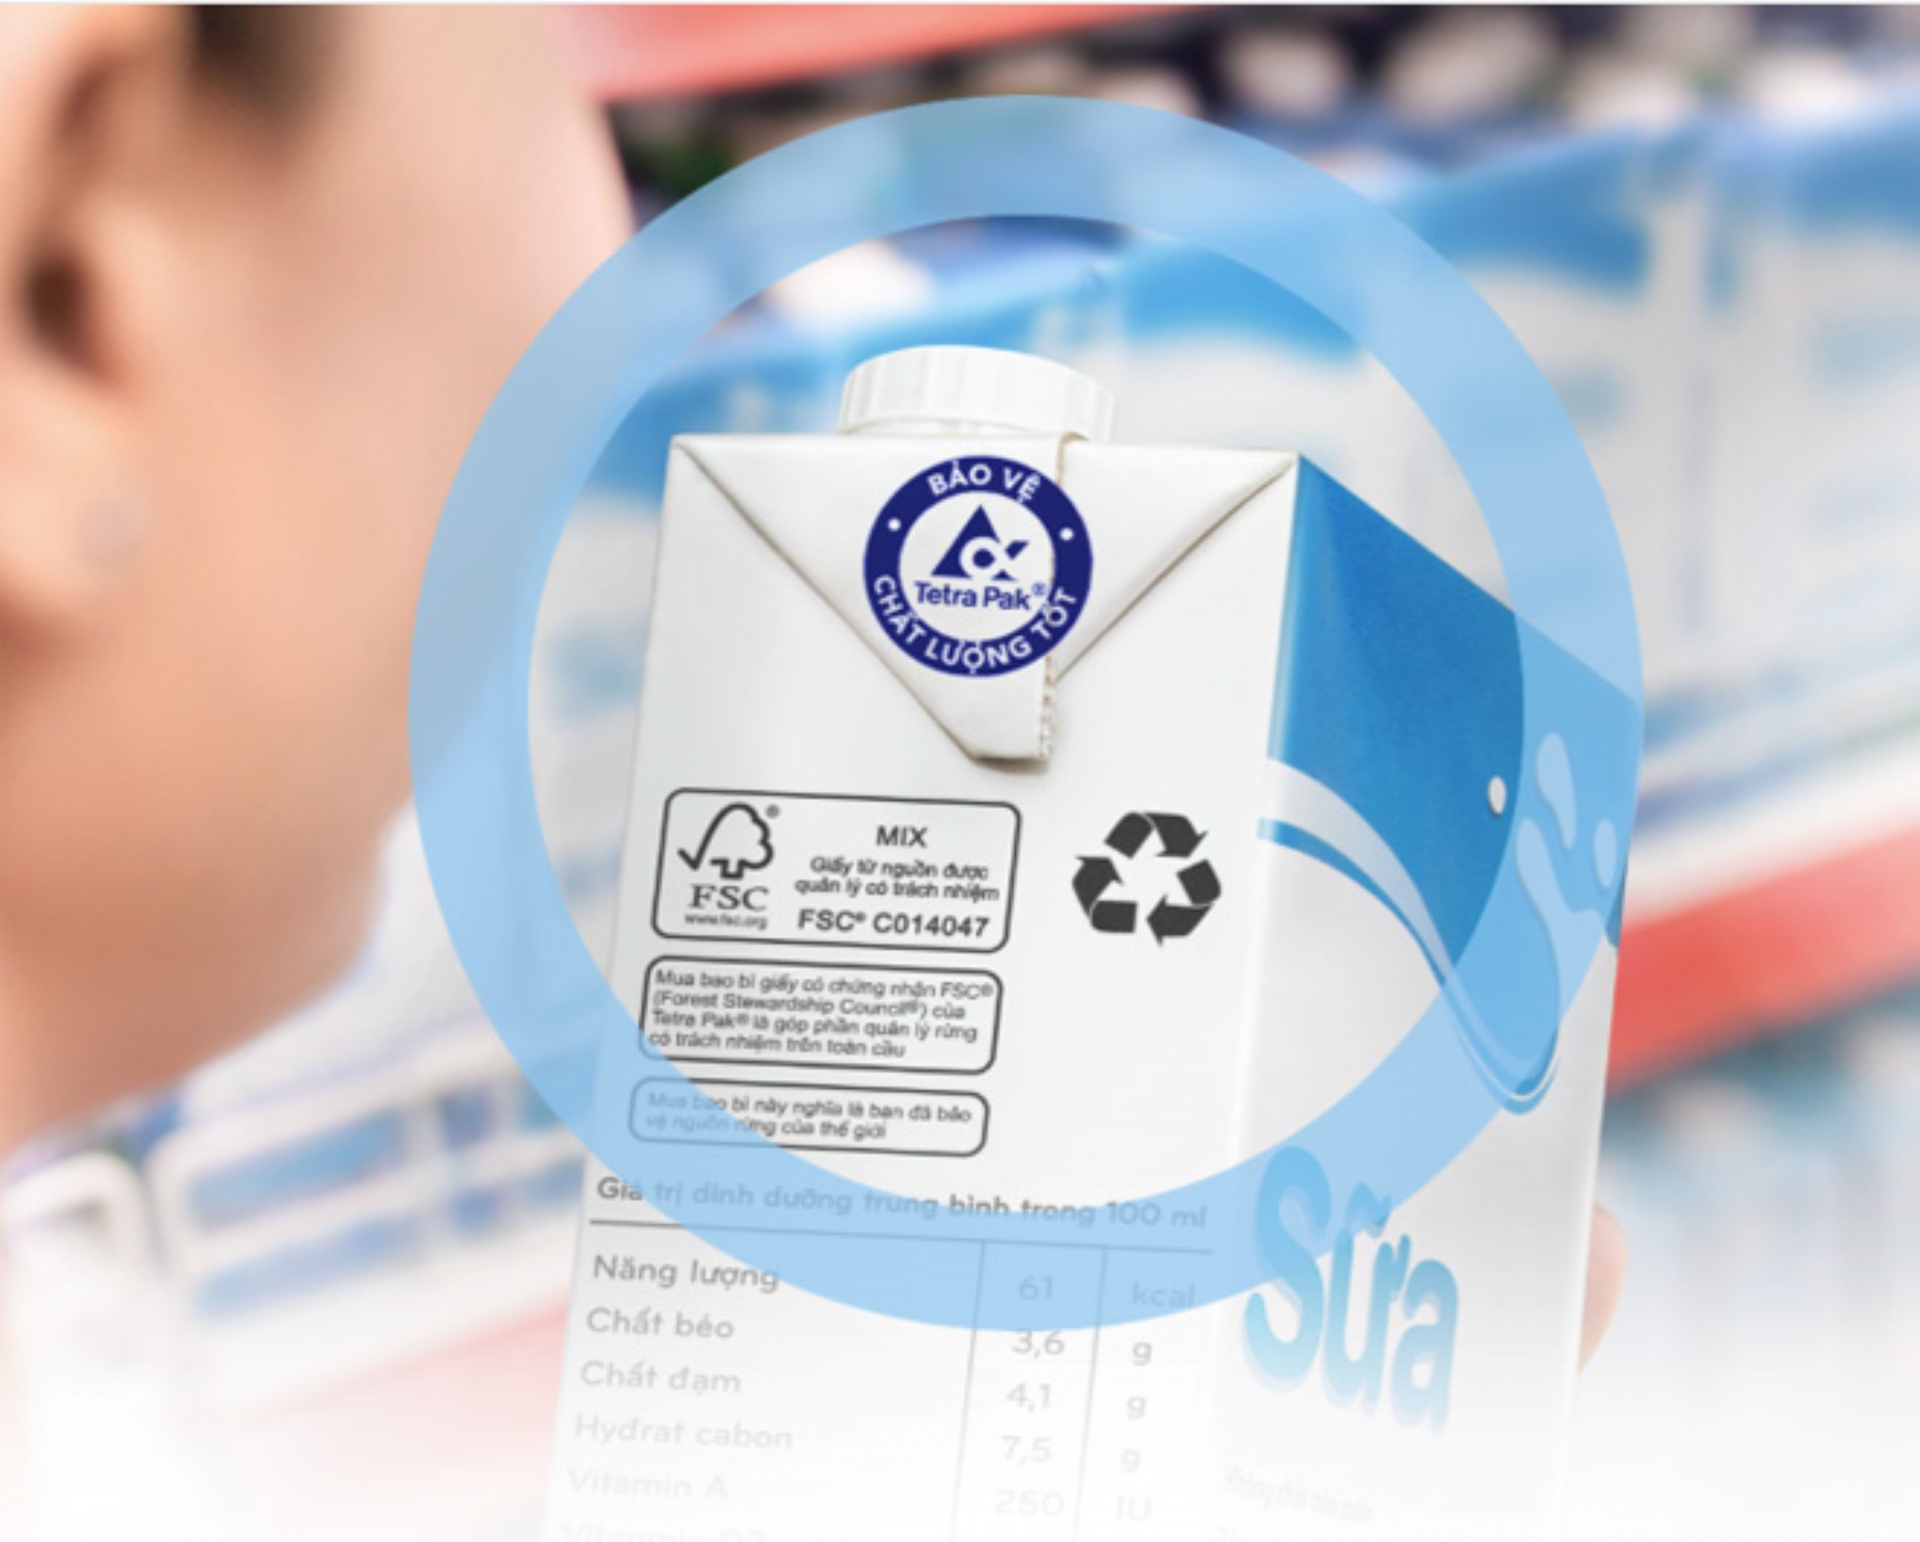 Sustainable development remains at the core of Tetra Pak's strategy.